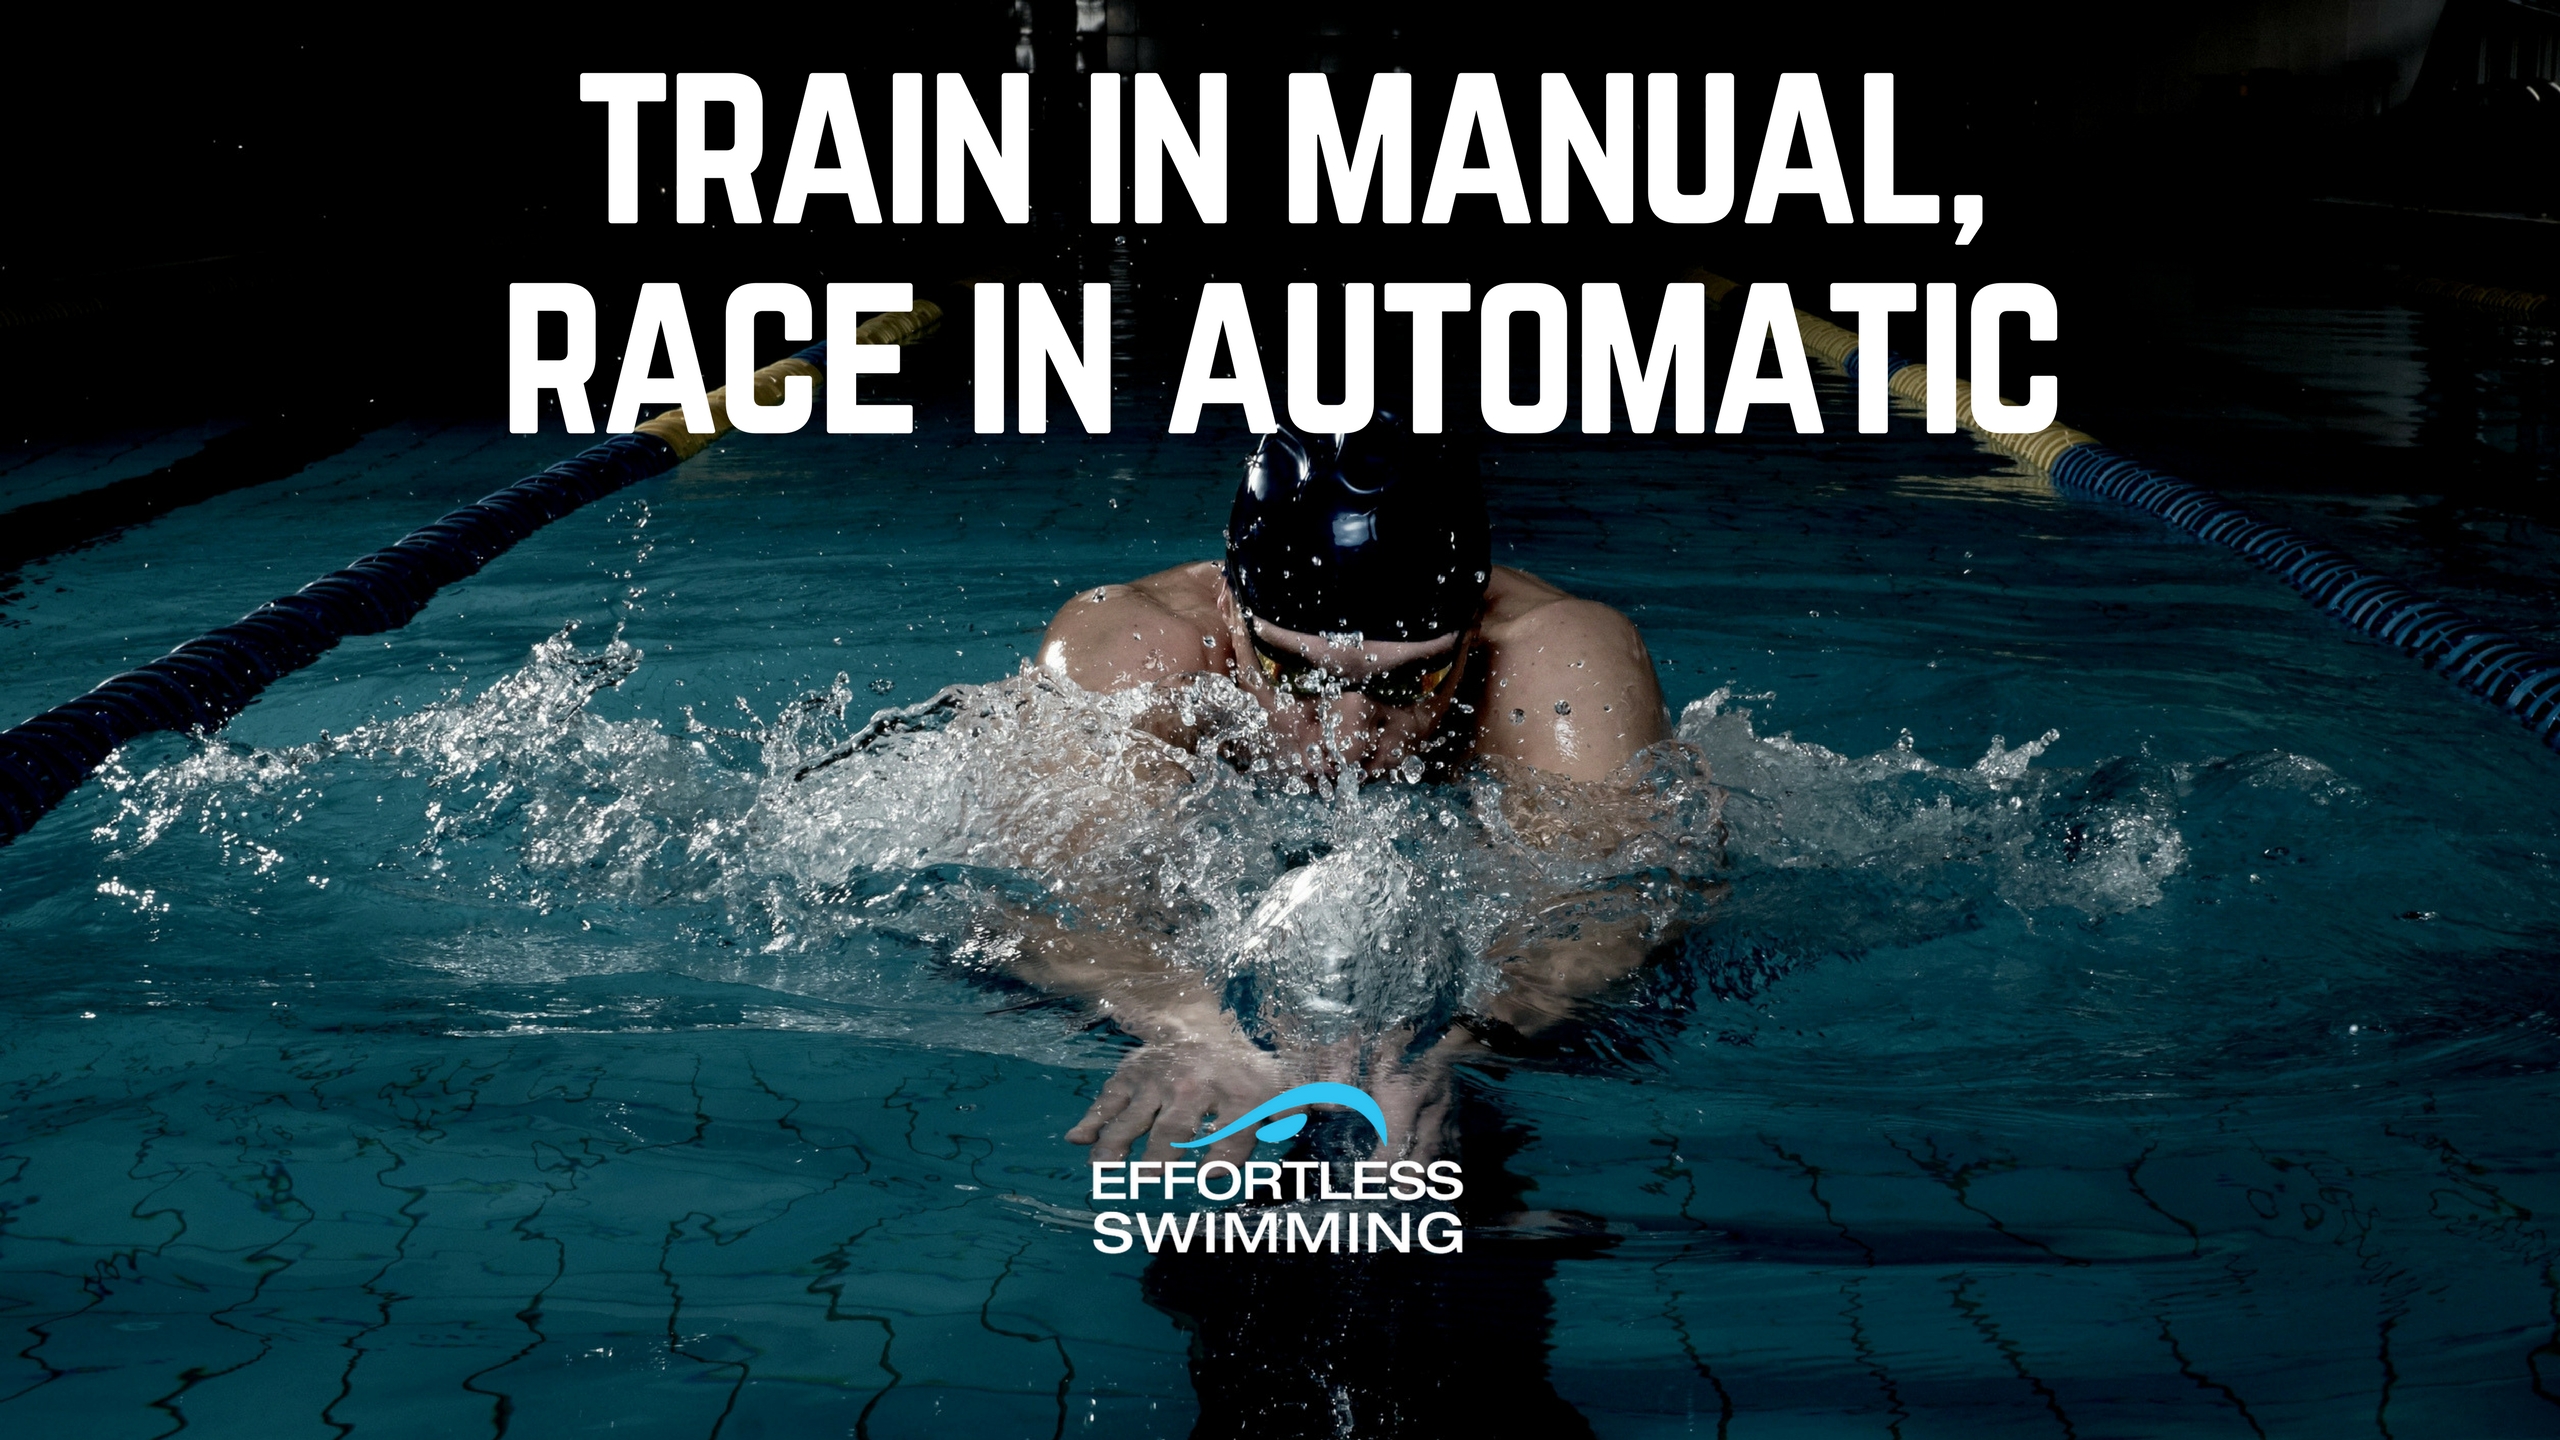 https://effortlessswimming.com/wp-content/uploads/2018/02/104-Train-in-Manual-Race-in-Automatic.jpg